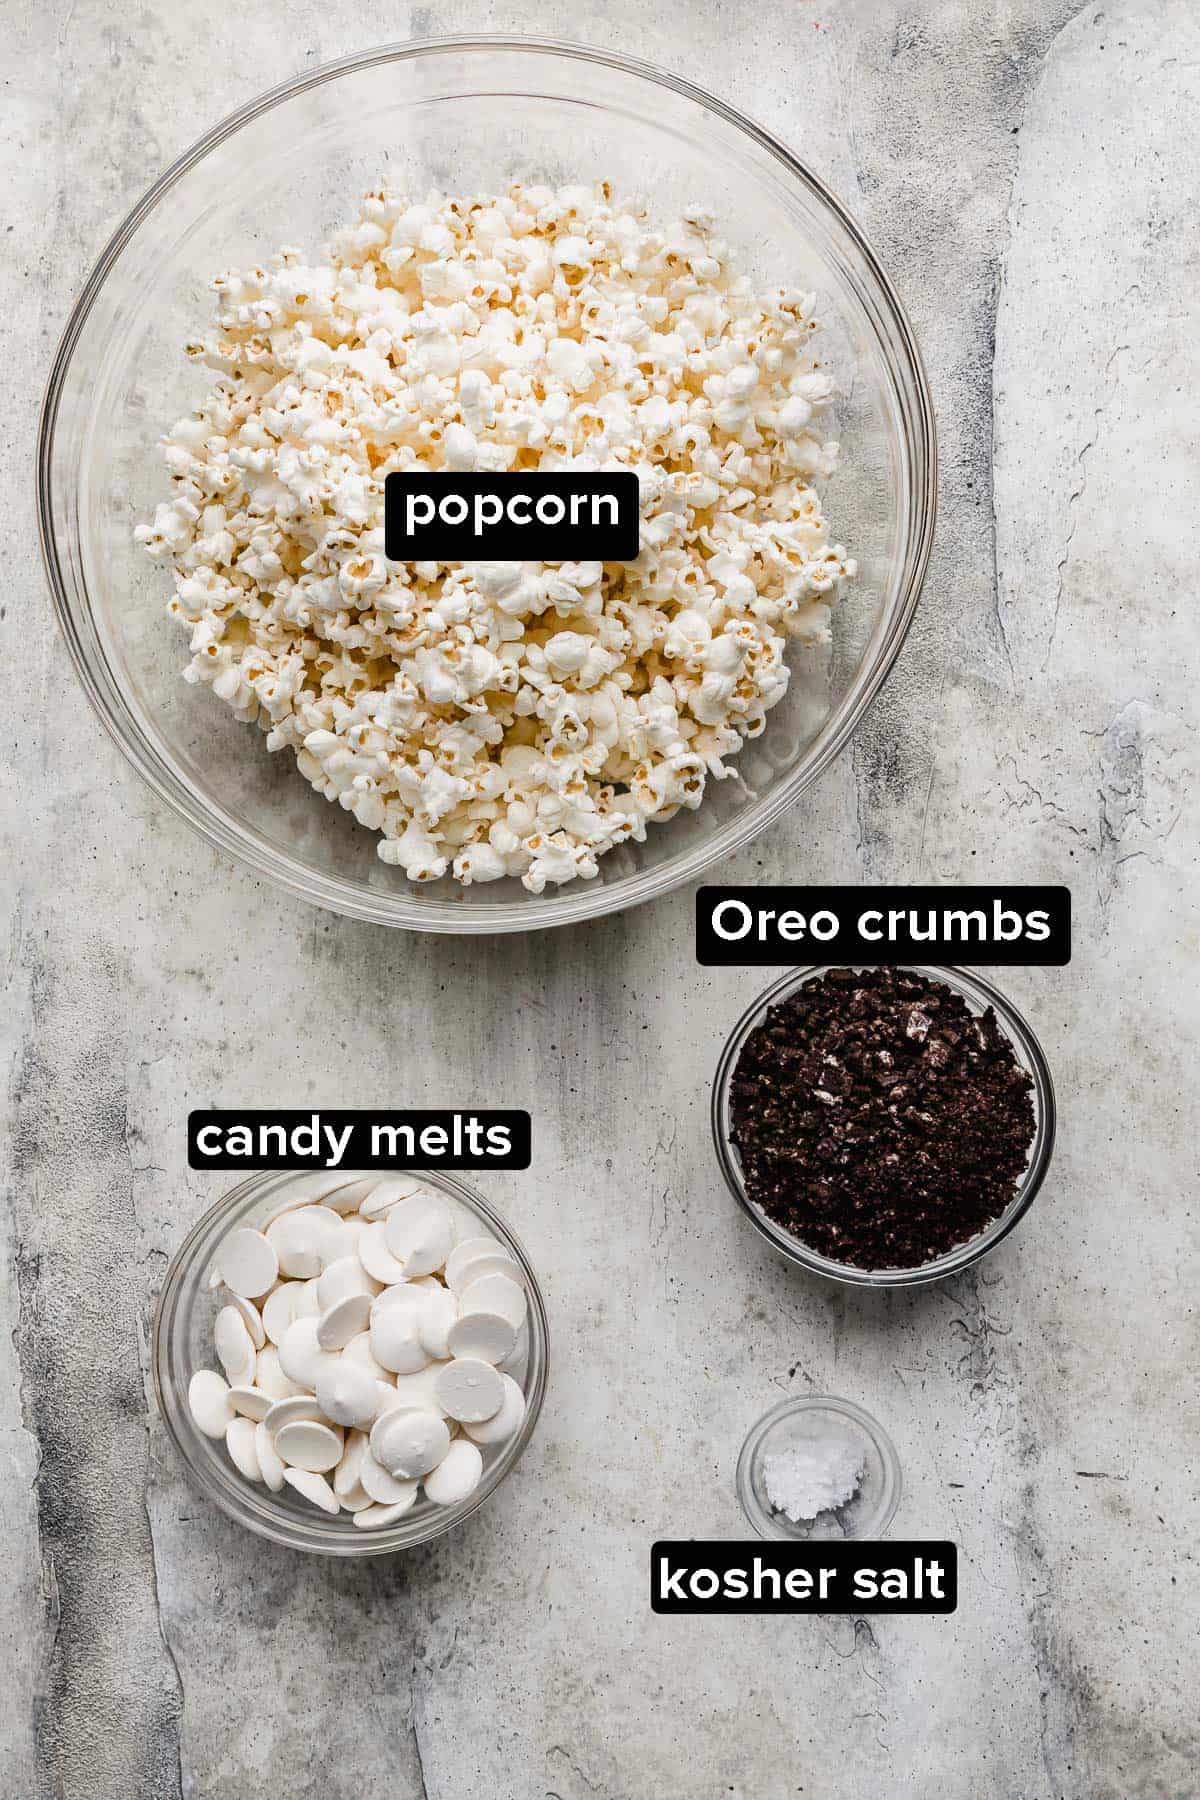 Oreo Popcorn ingredients on a gray background: popcorn, candy melts, oreo crumbs, and kosher salt.